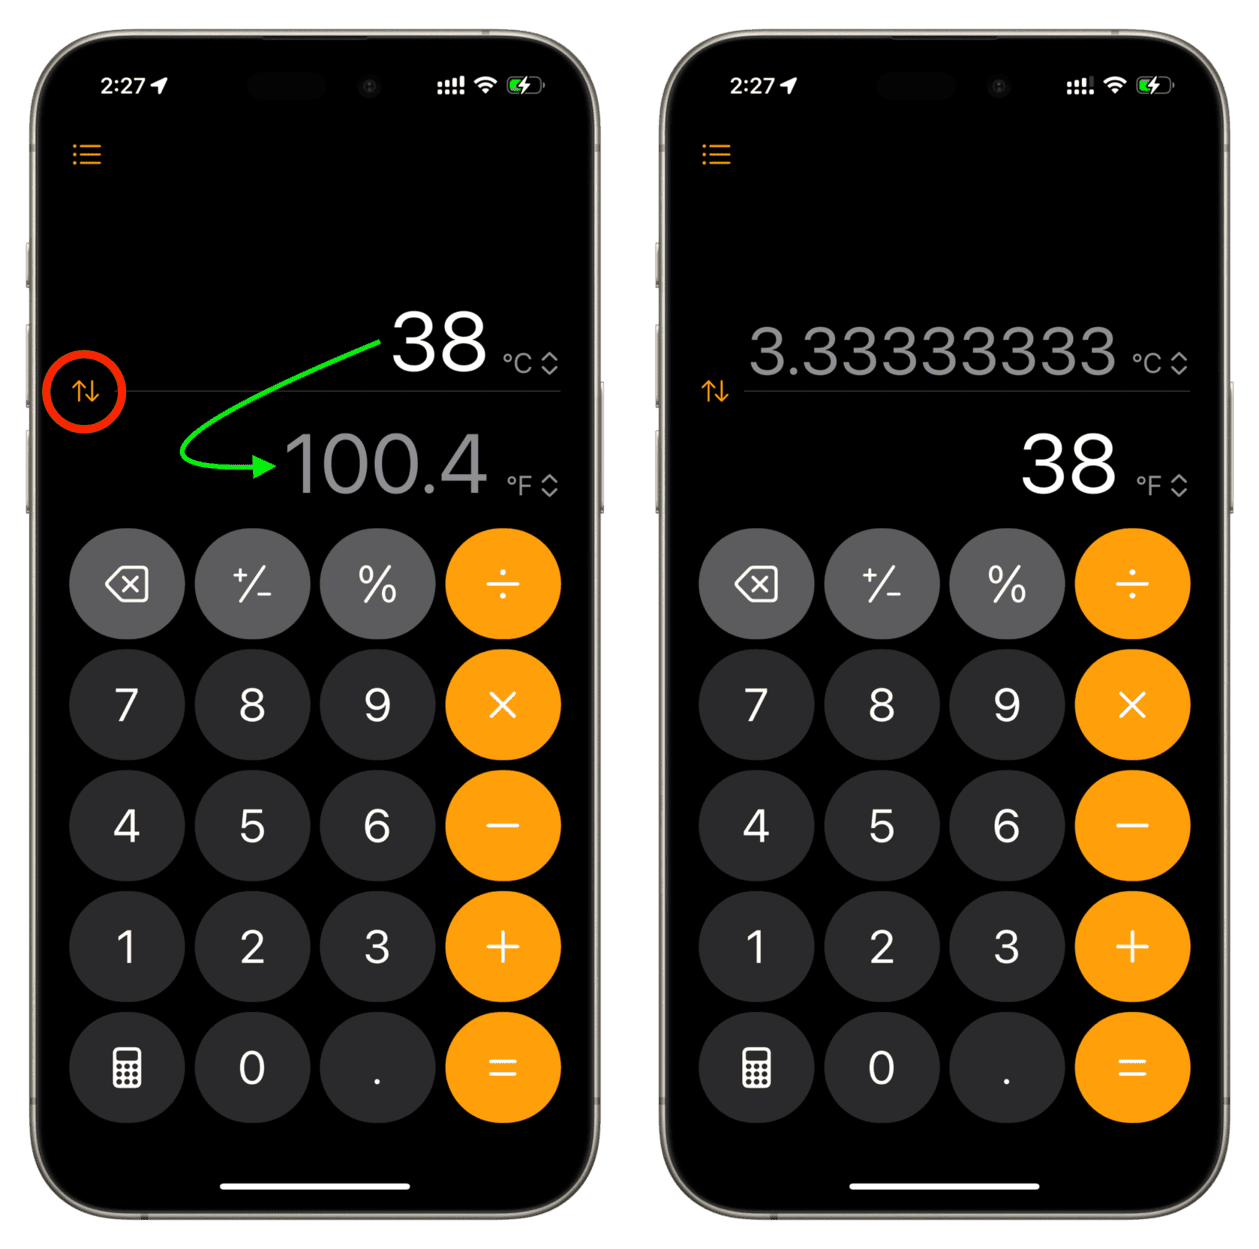 Tap arrow button in iPhone Conversion Calculator to move active value up or down